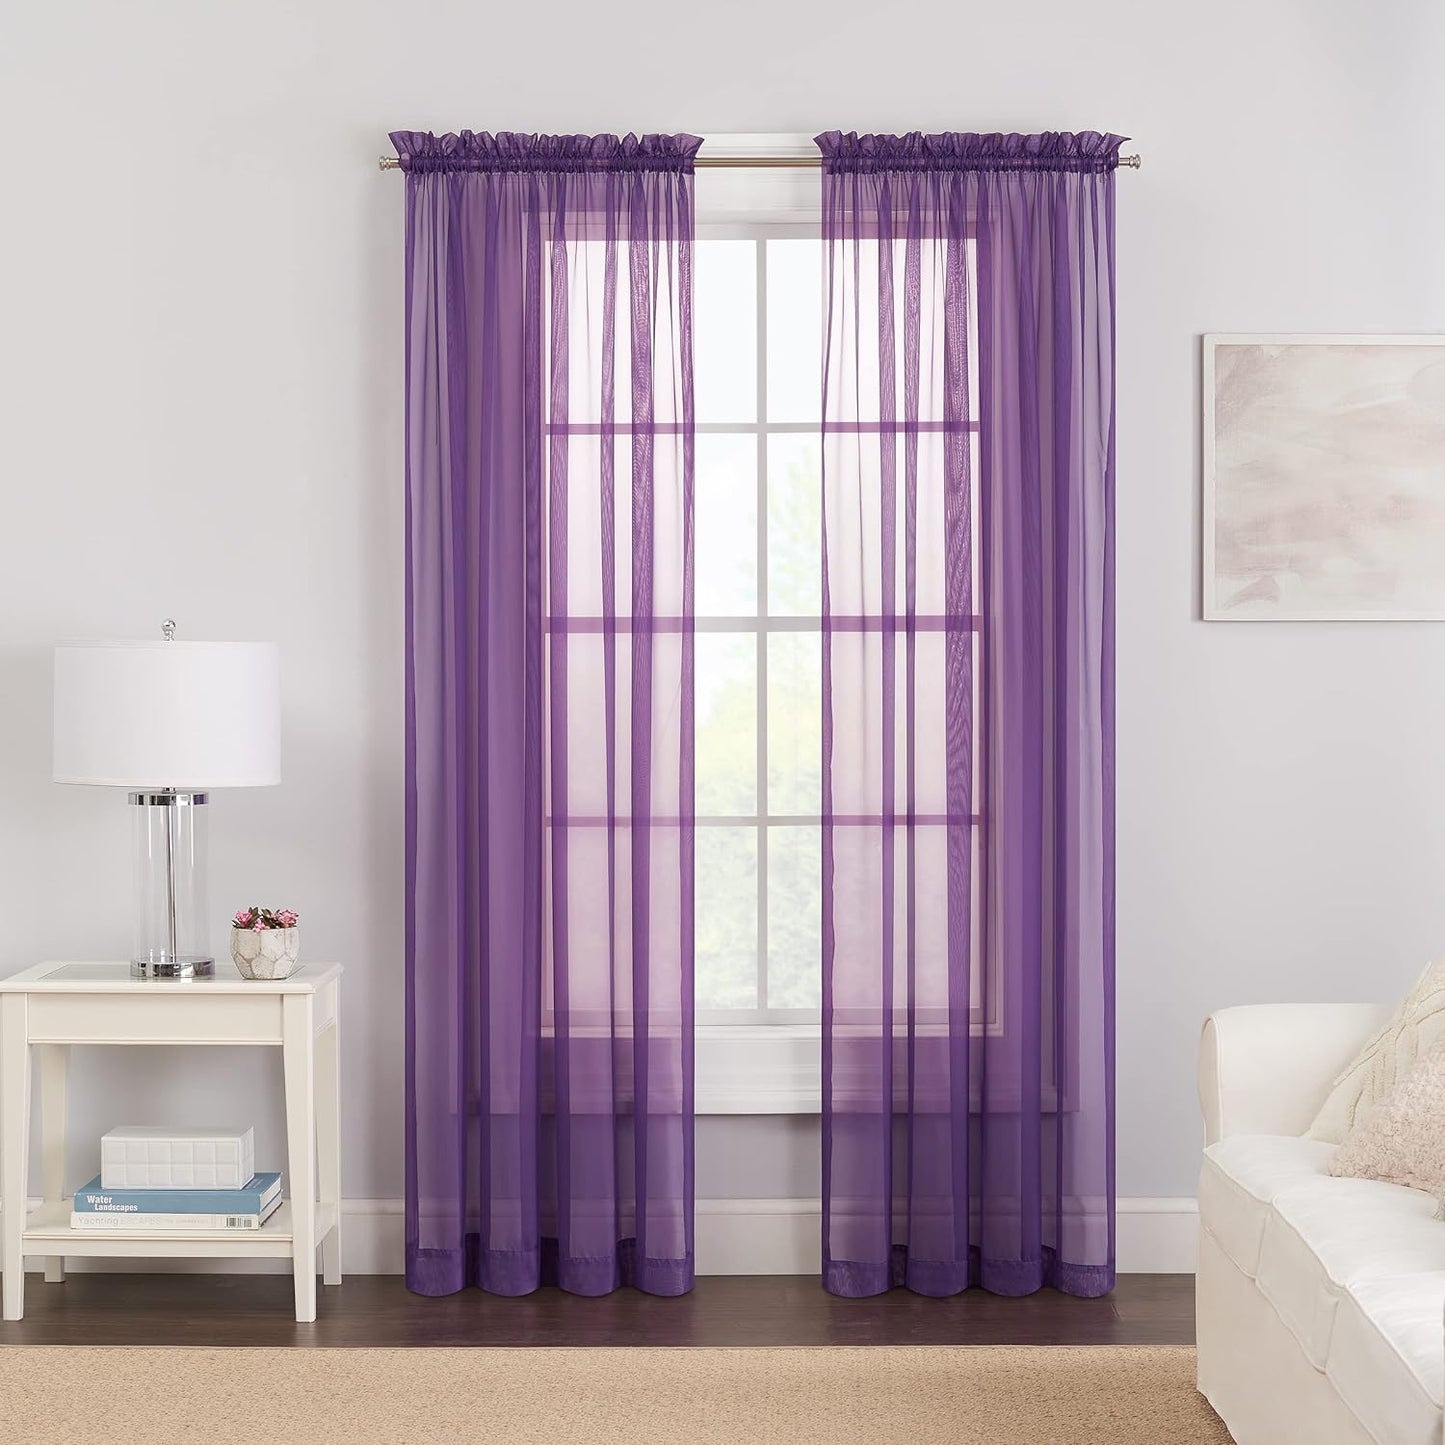 Pairs to Go Victoria Voile Modern Sheer Rod Pocket Window Curtains for Living Room (2 Panels), 59 in X 84 In, Taupe  Ellery Homestyles Purple Curtains 59 In X 63 In